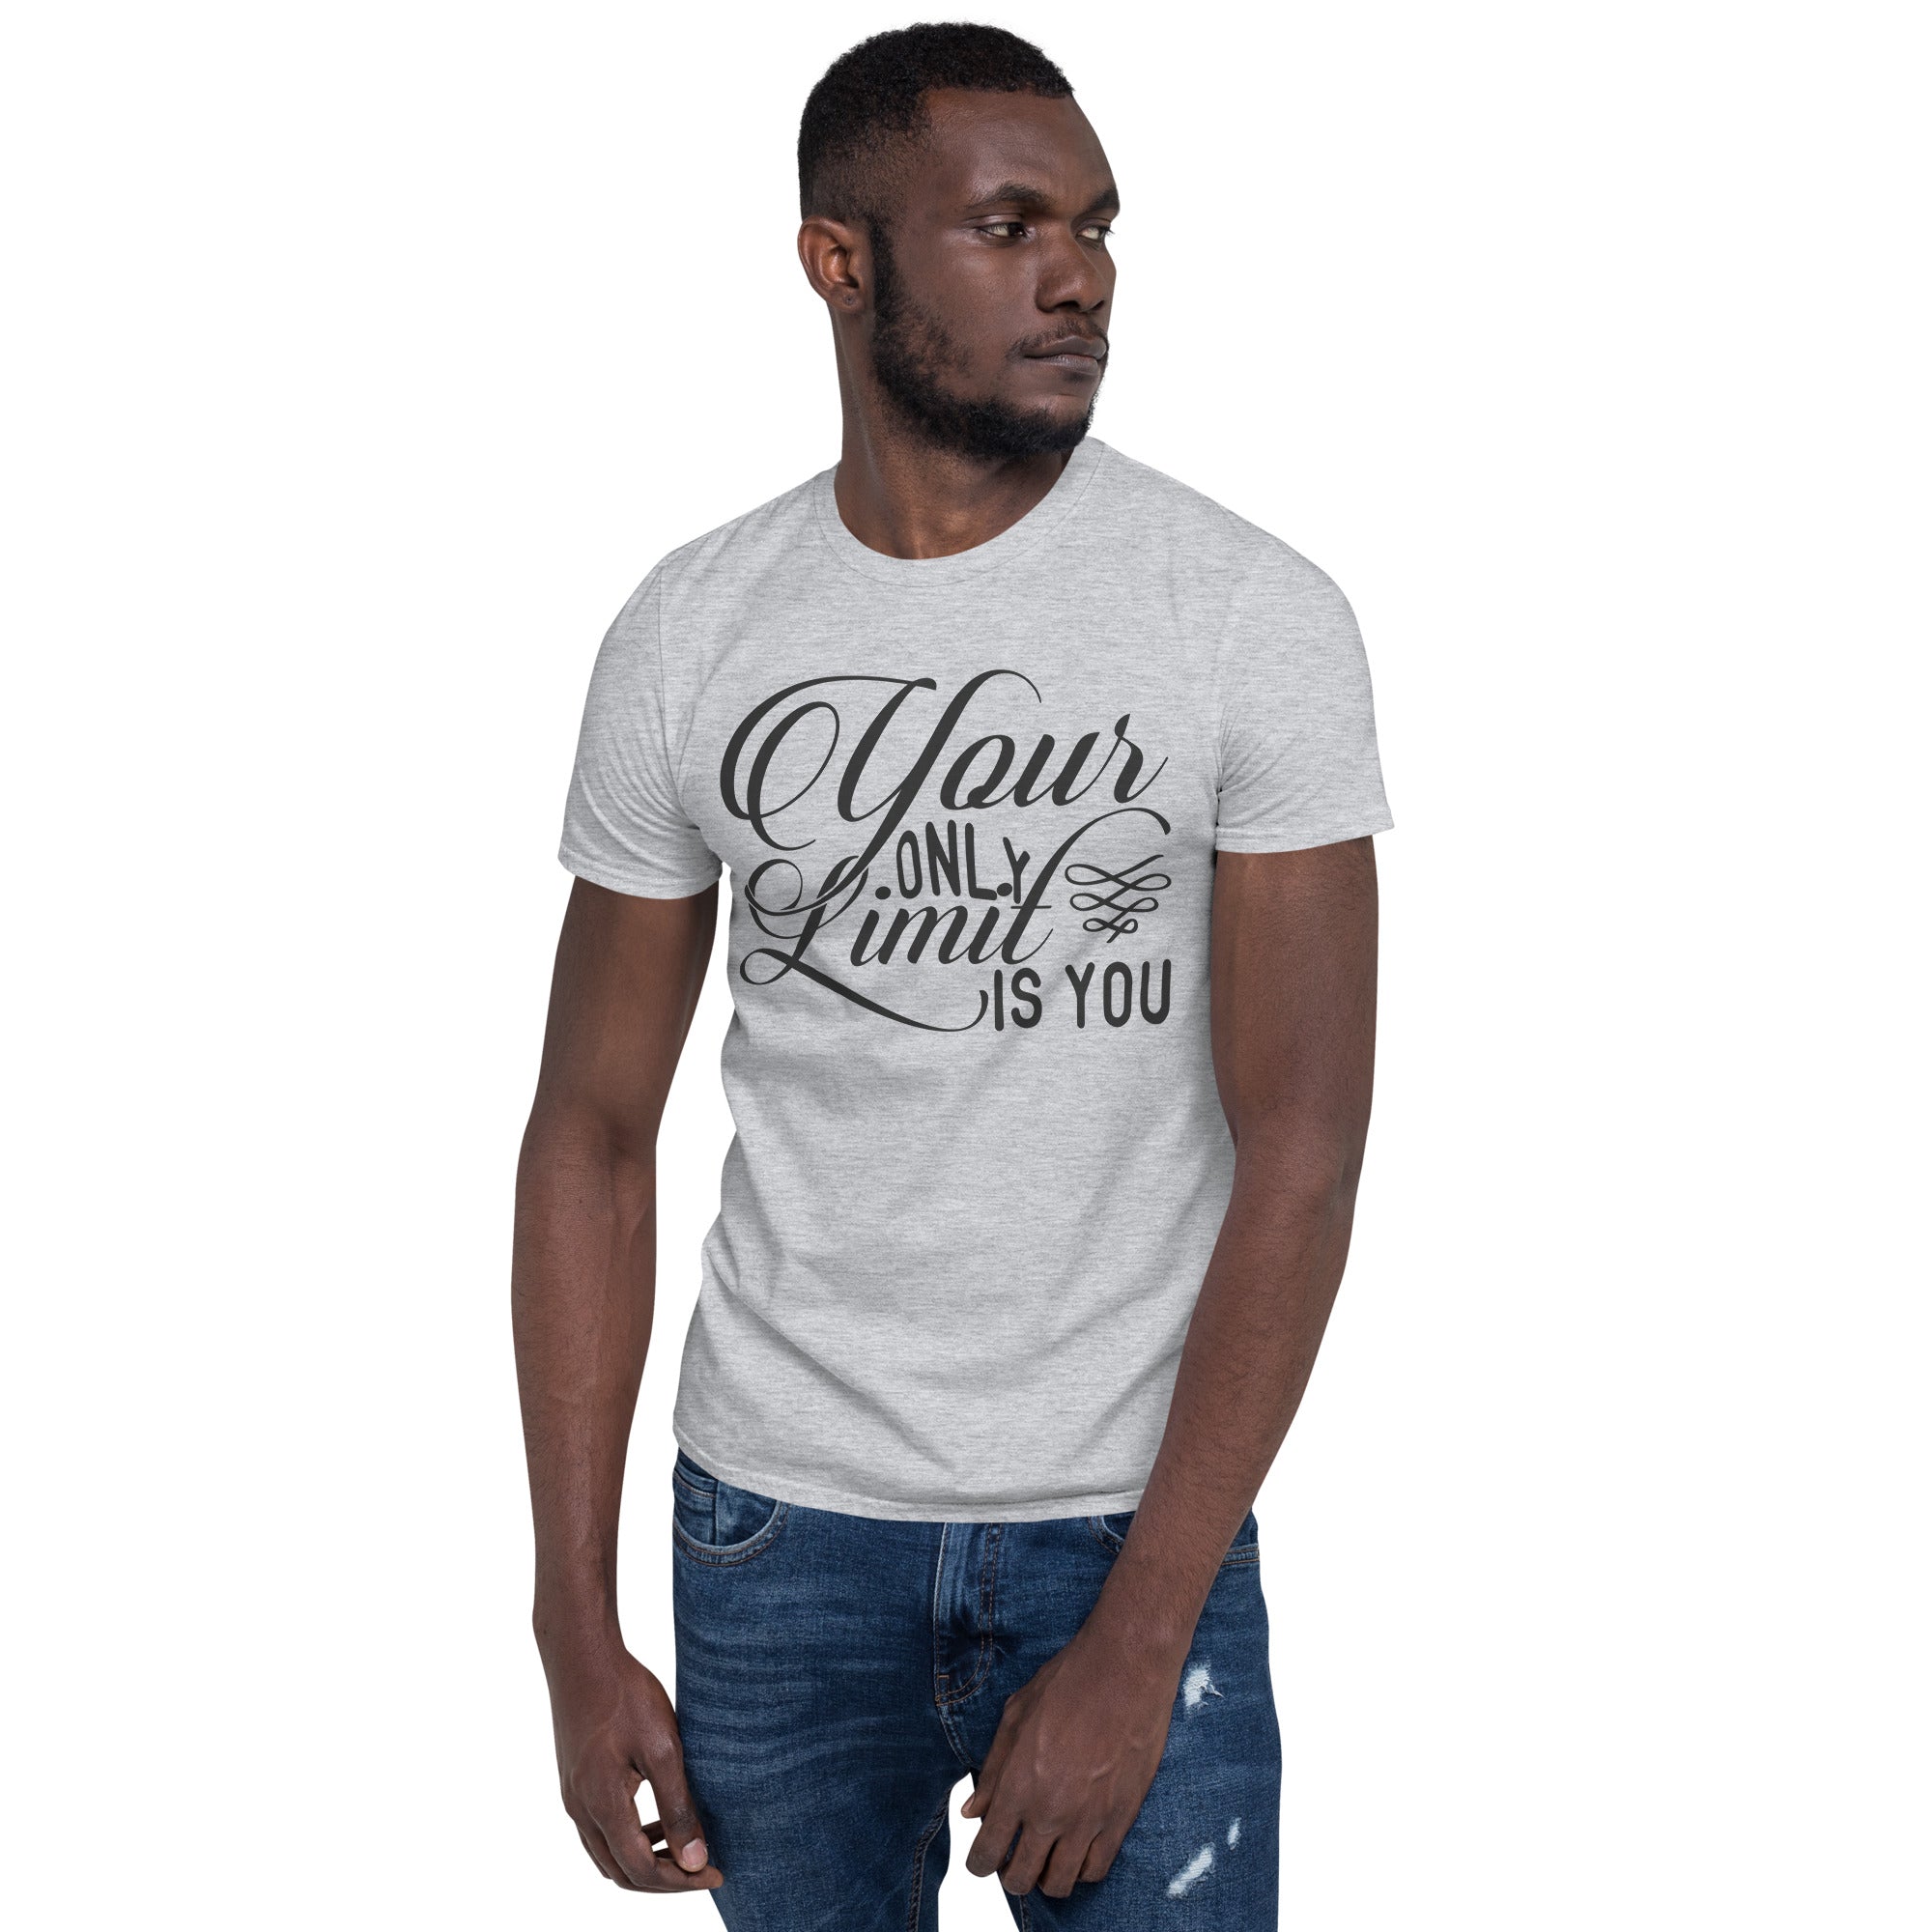 Your Only Limit Is You - Short-Sleeve Unisex T-Shirt